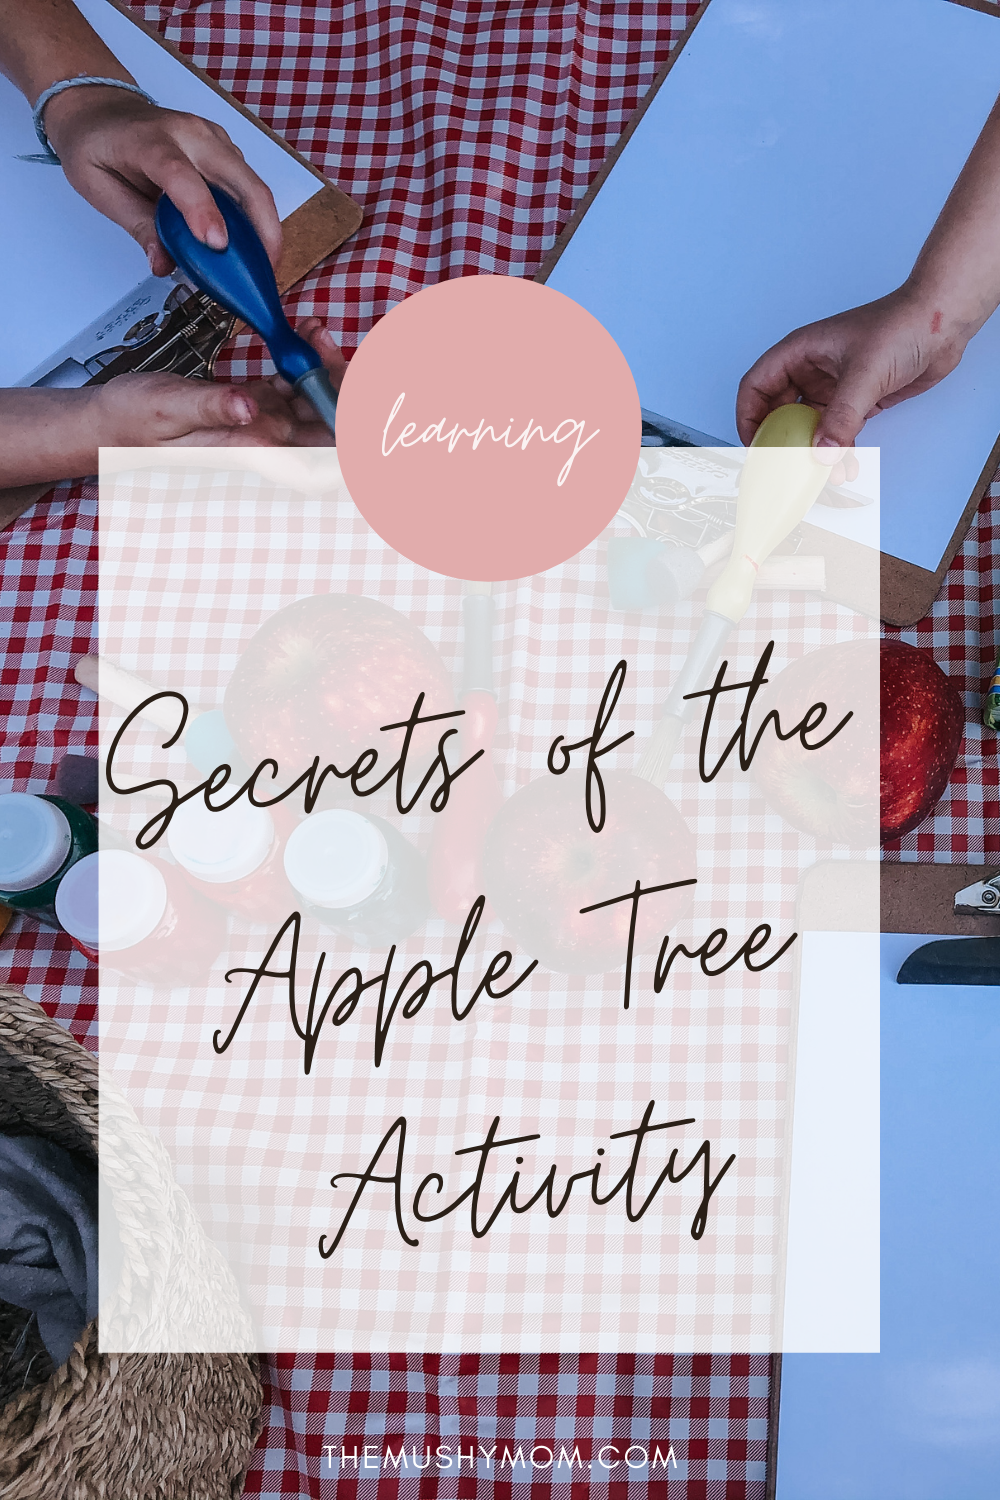 Apple Tree Activity .png